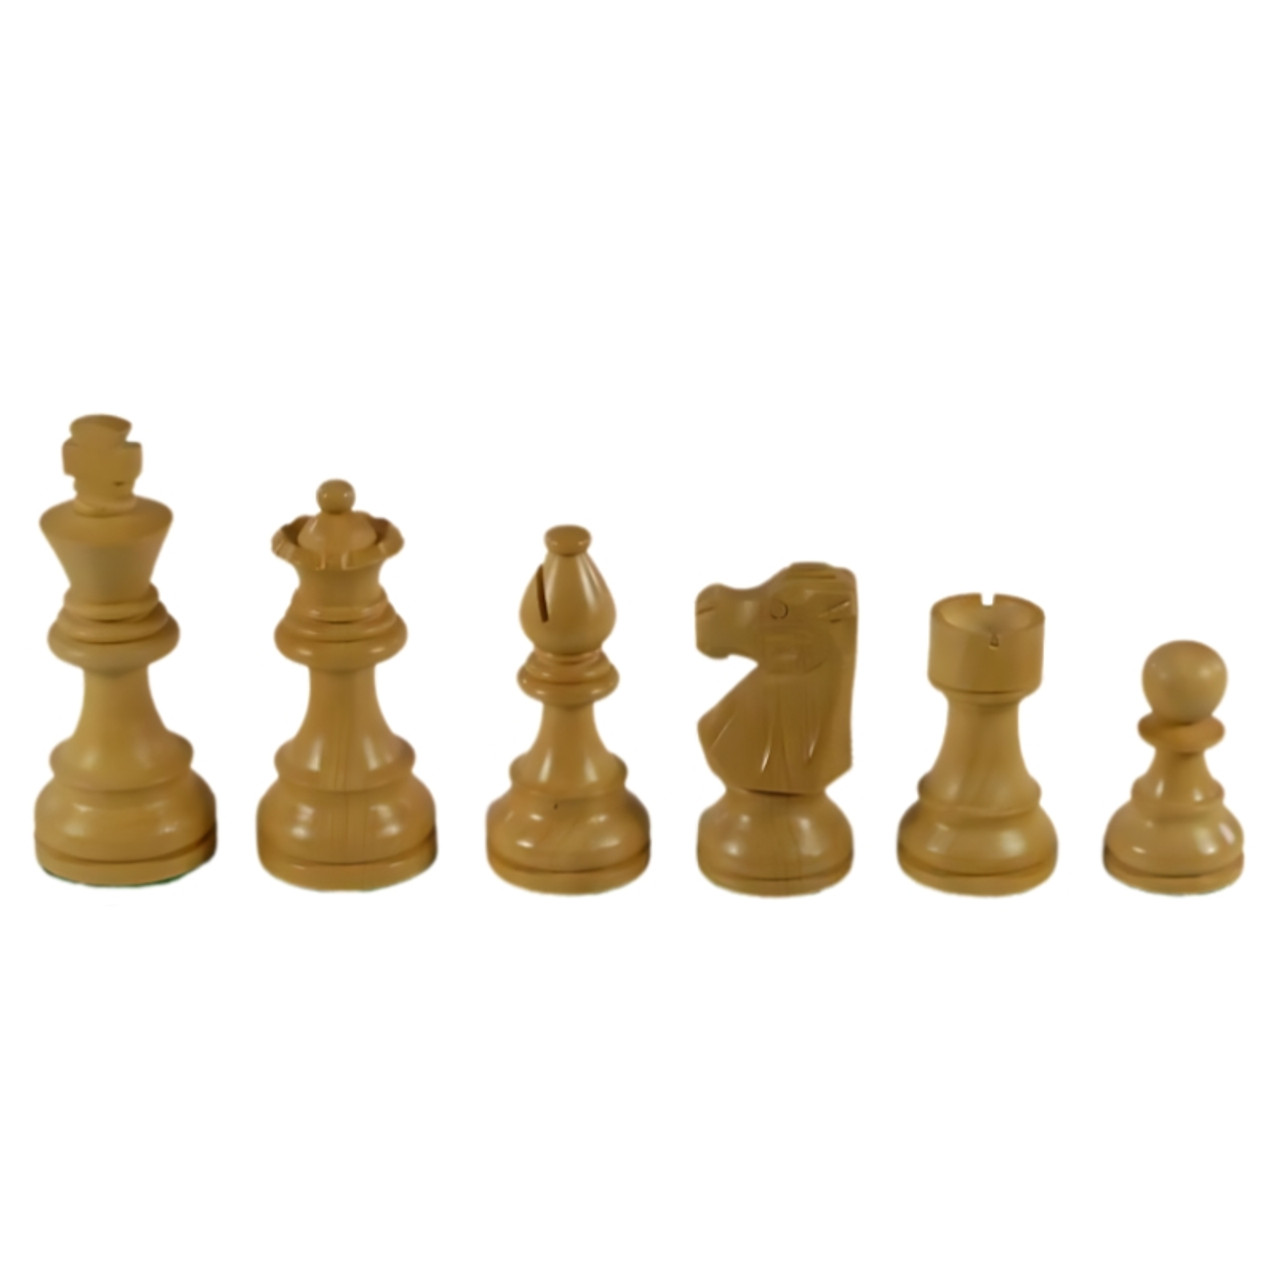 The Exquis Chess Pieces - Kirkwood & Natural Boxwood French Knight Chessmen with 3" King white pieces